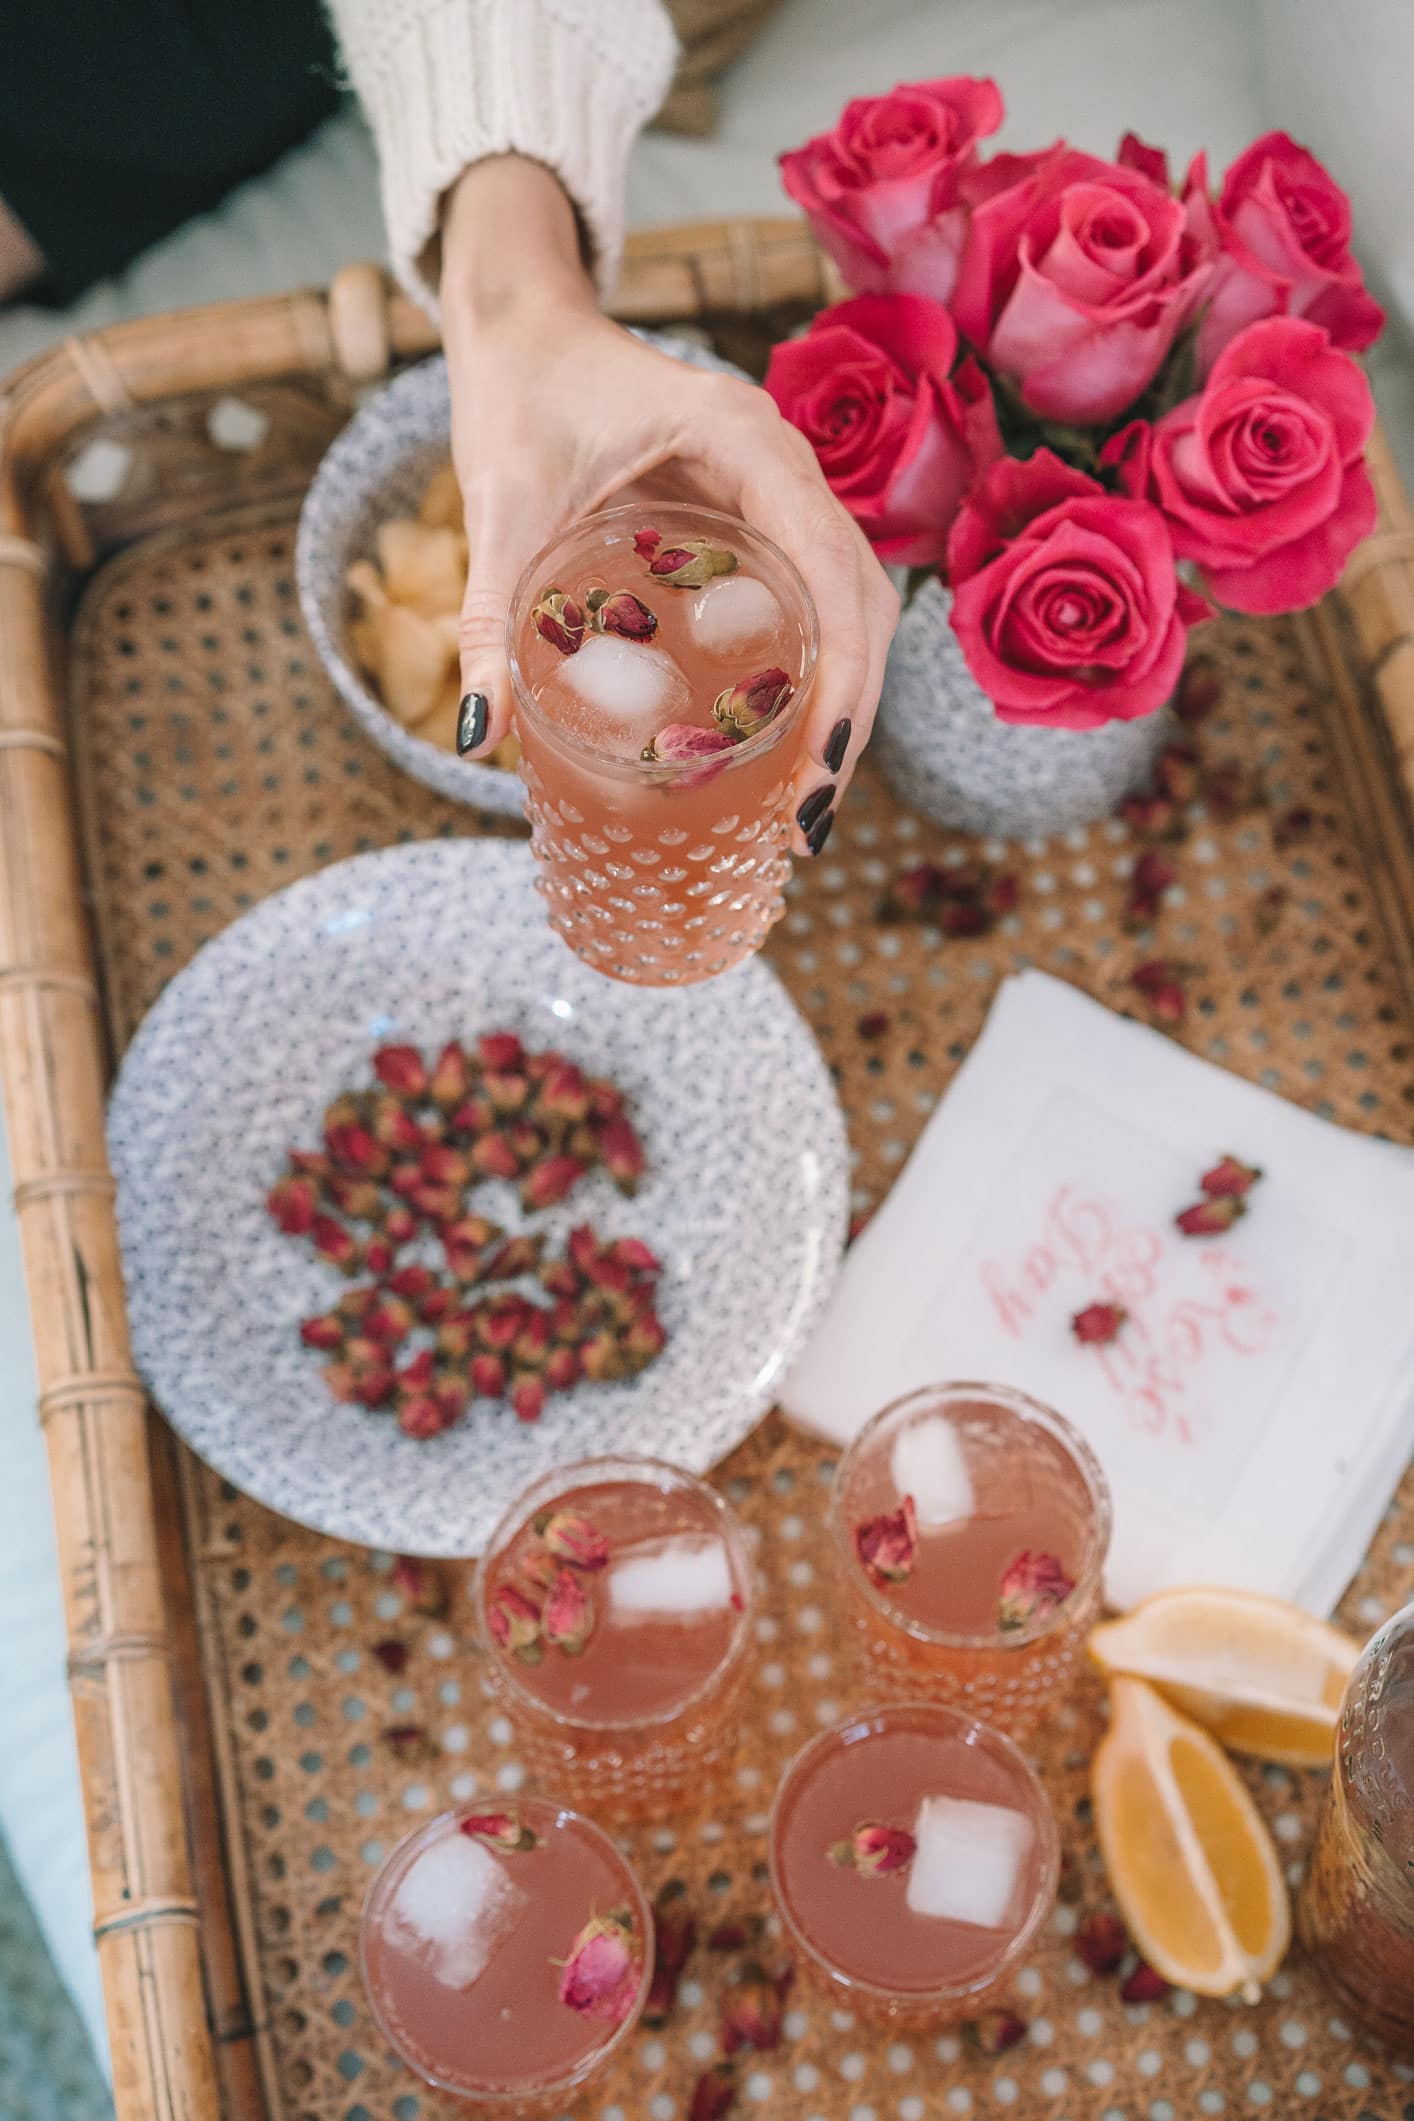 Easy Rose Lemon Spritzers For Mother’s Day!